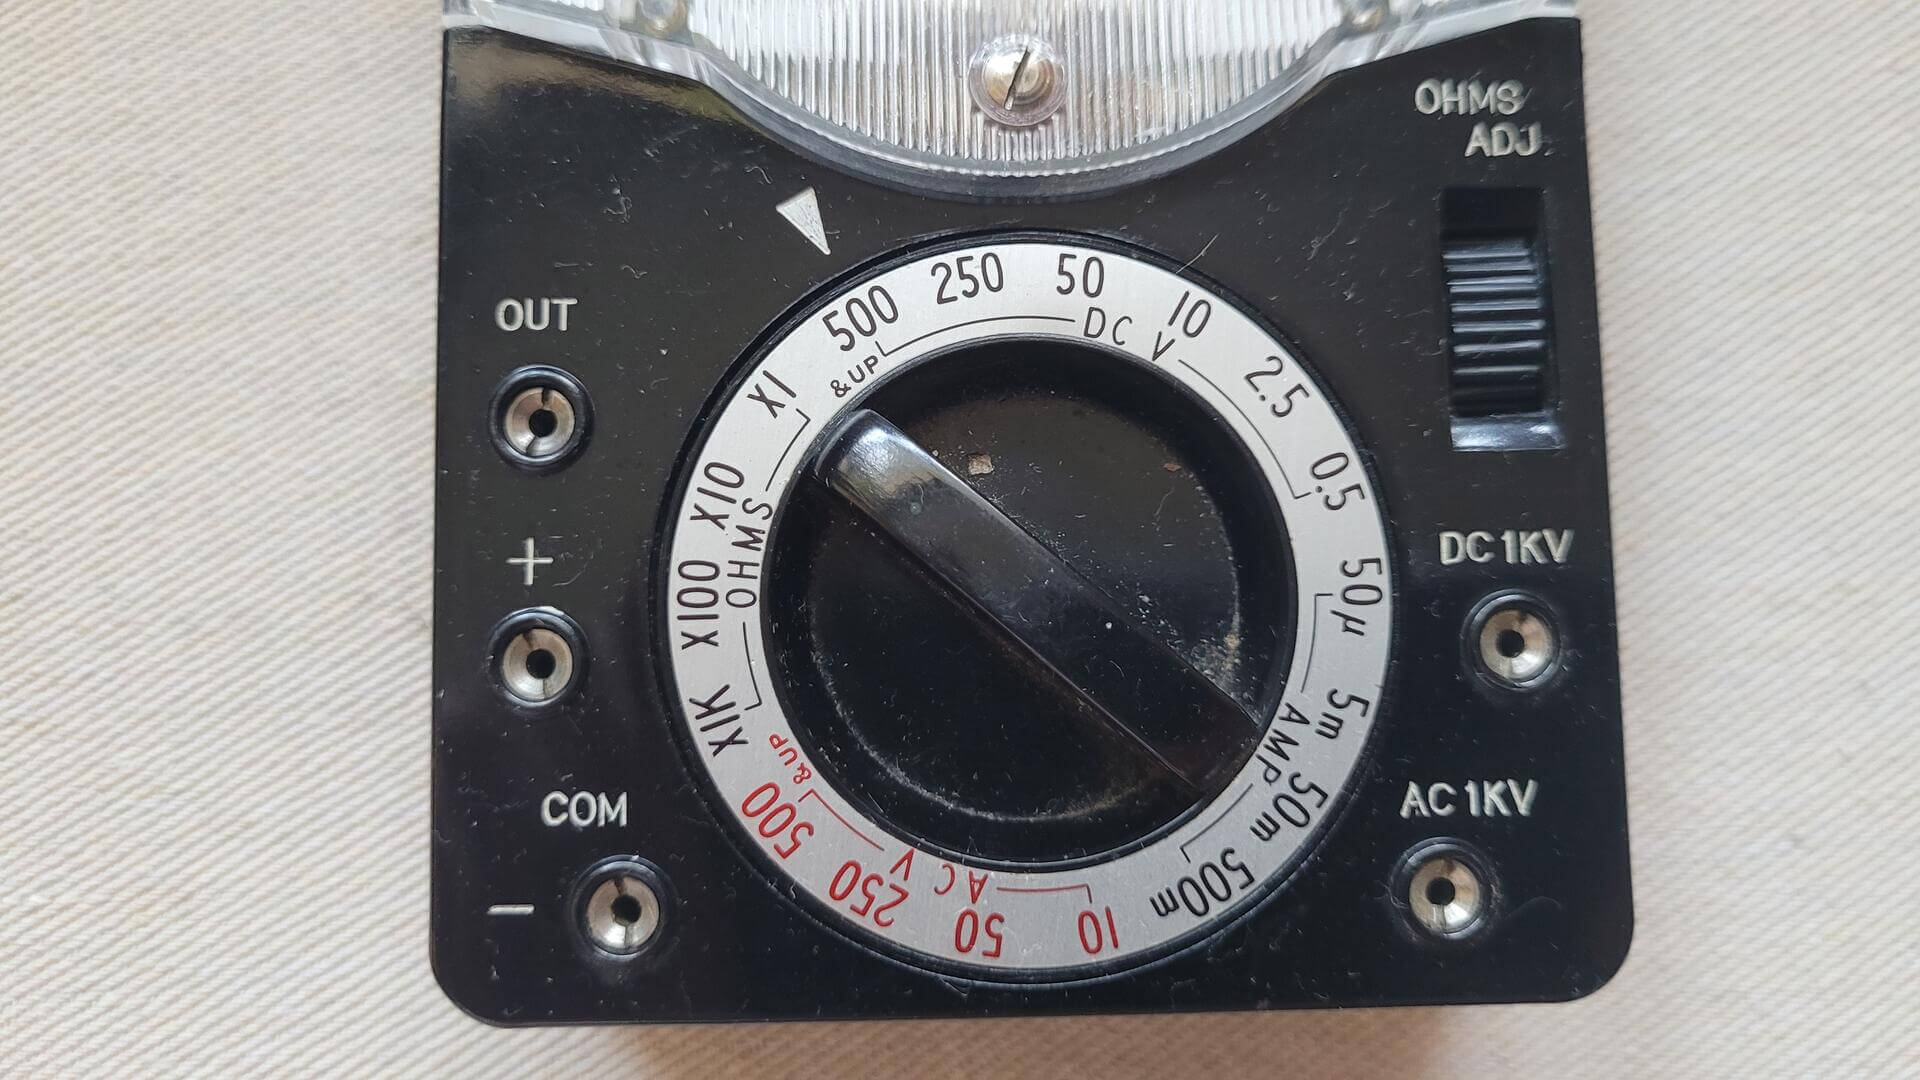 Vintage Cosrad Analog Ohm AC/DC Multimeter Tester Model SK-80 - Collectible Made in Japan 1970s electronics testing, measuring, and inspection equipment